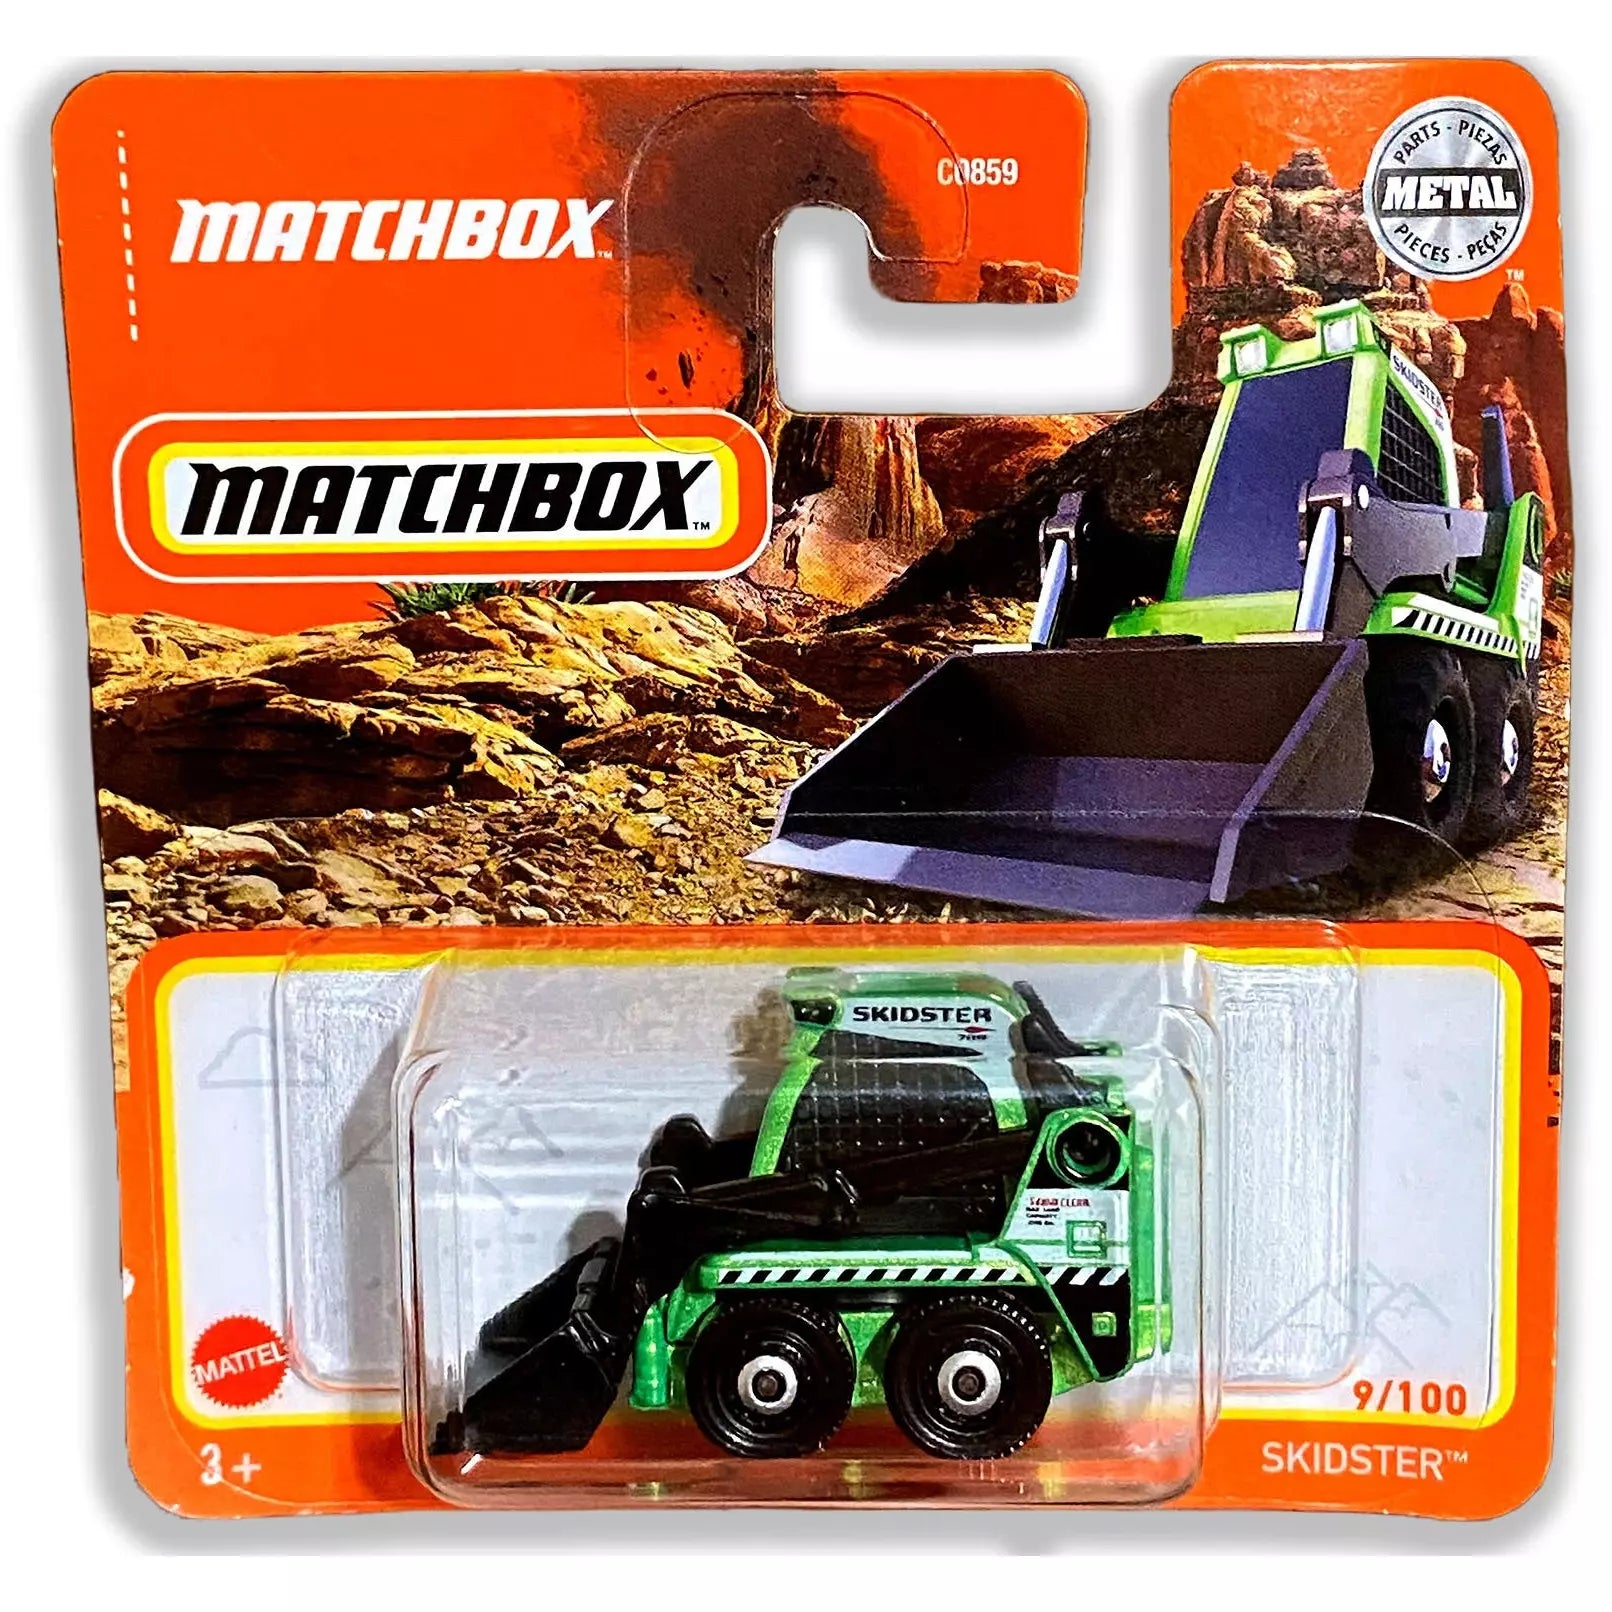 MatchBox Die Cast 1:64 Scale Vehicle - Skidster (Green) - BumbleToys - 2-4 Years, 5-7 Years, Boys, Collectible Vehicles, MatchBox